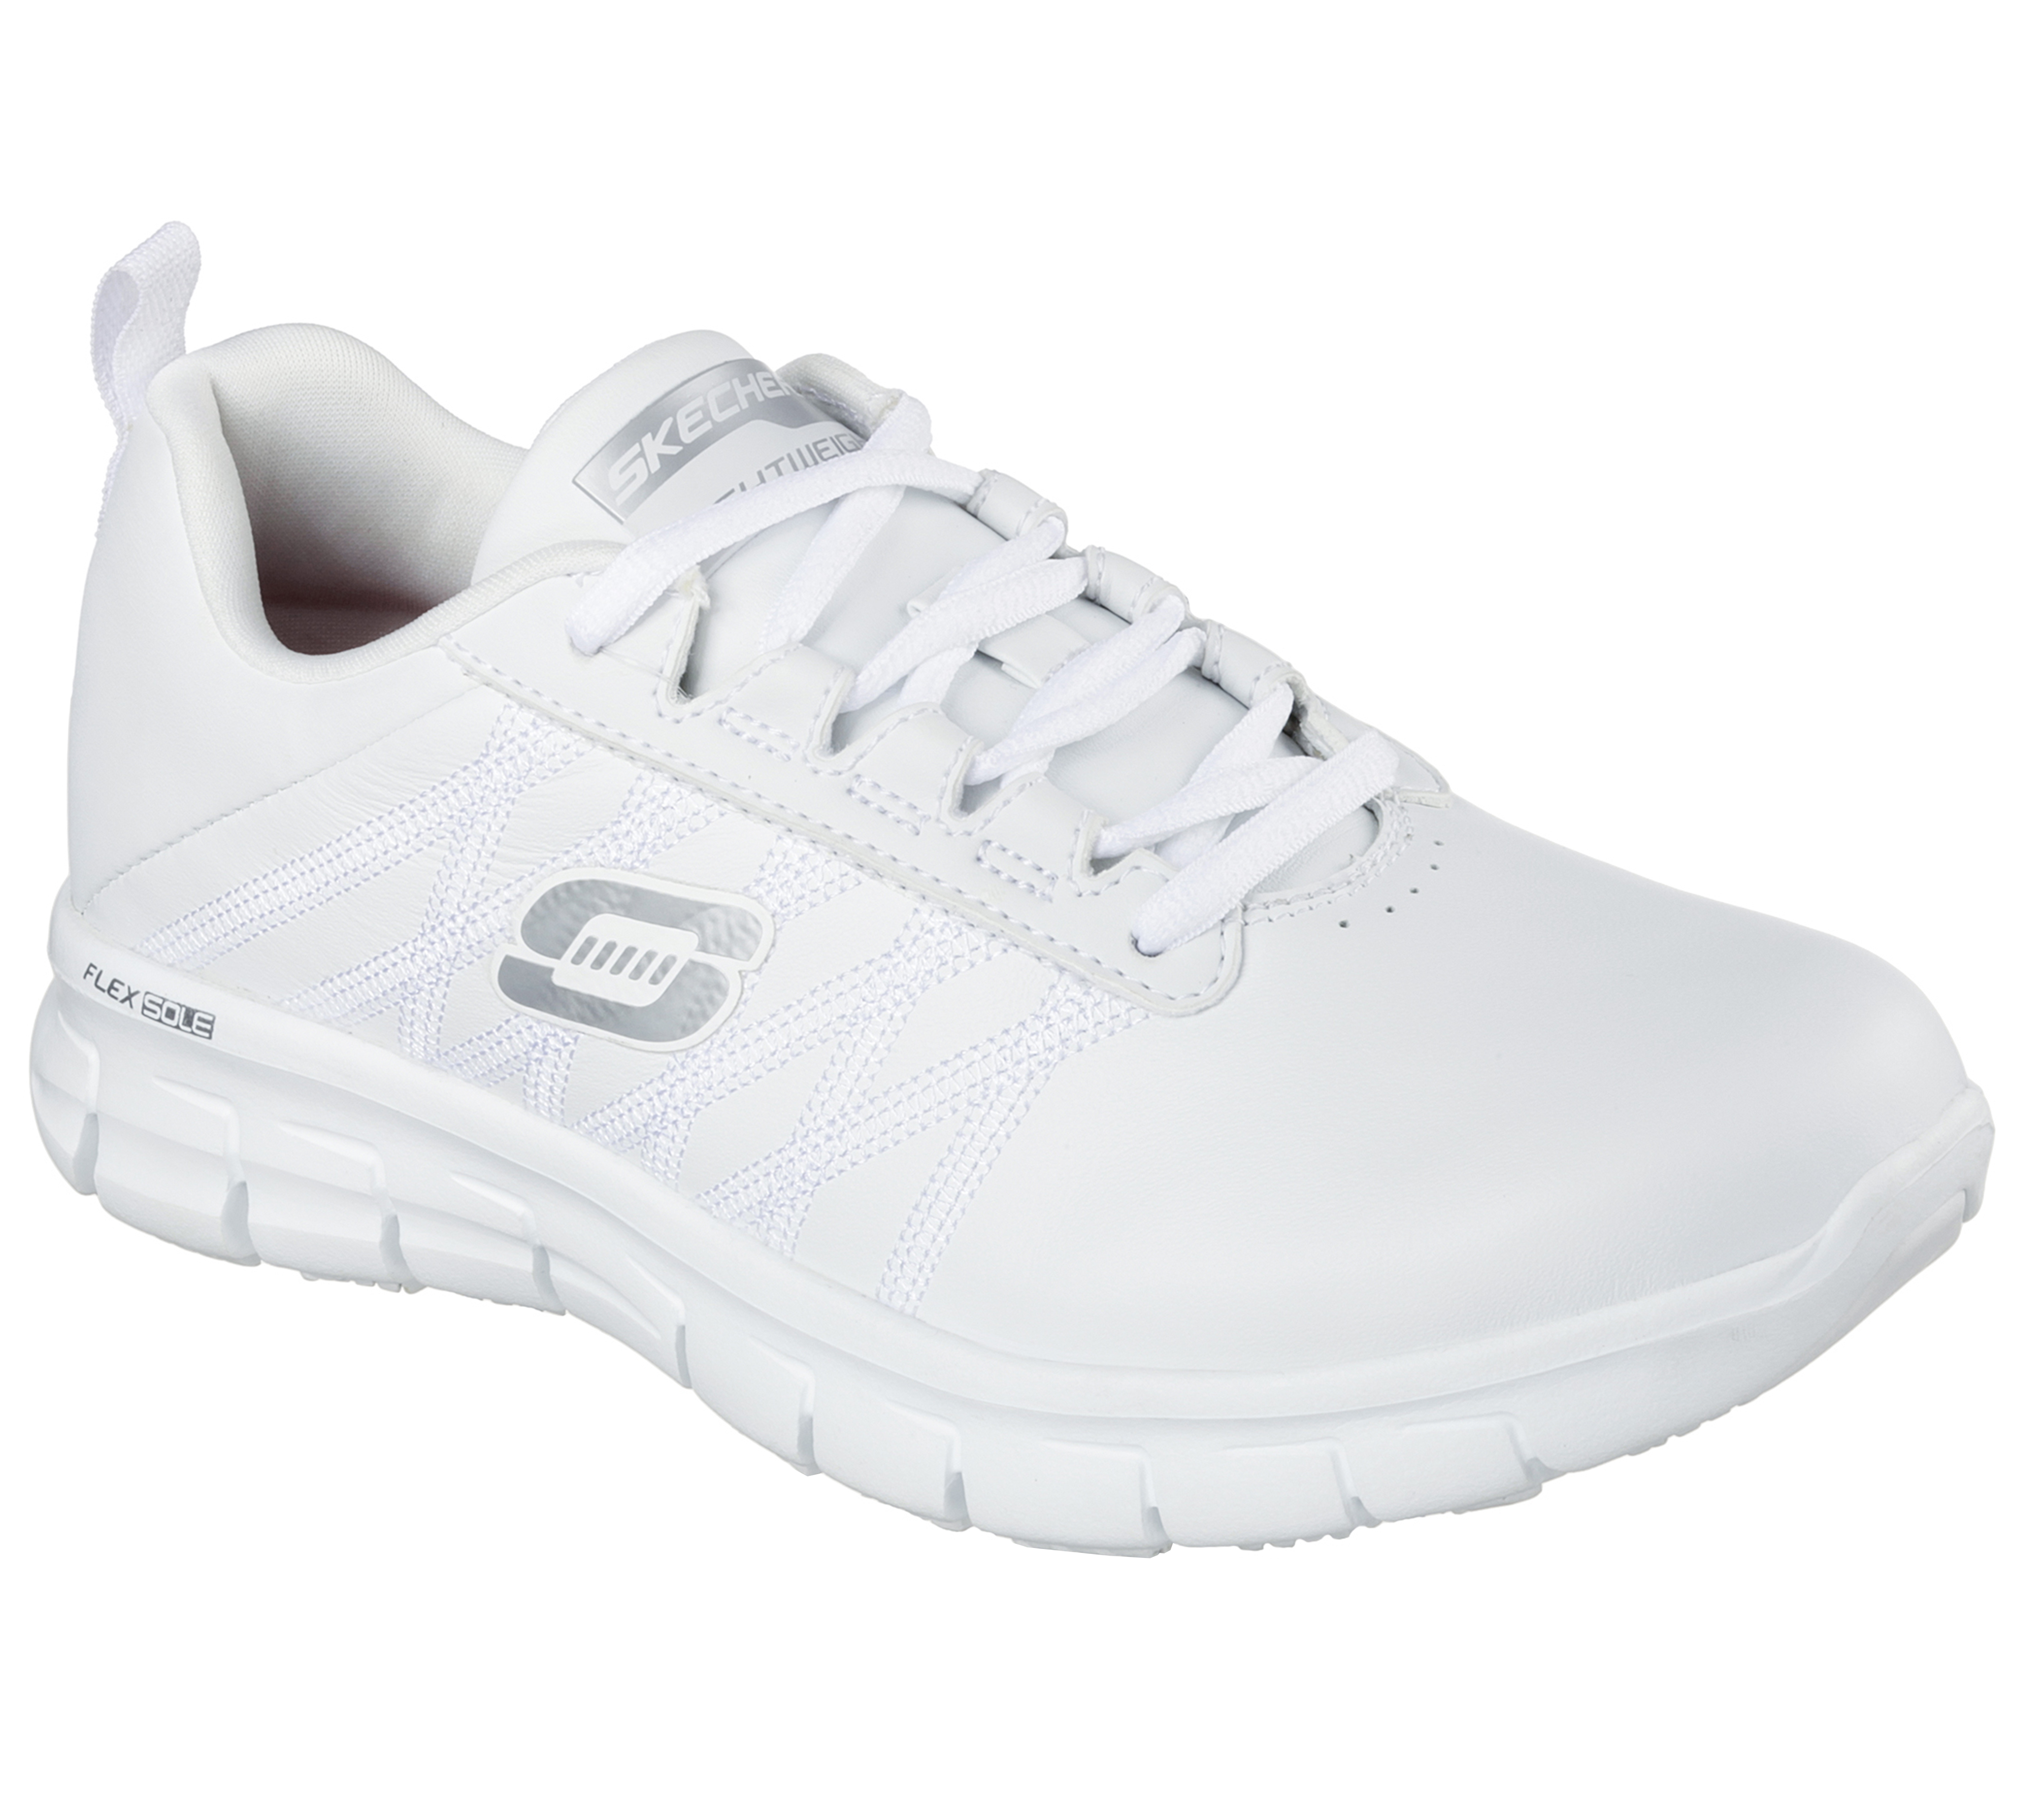 Work Relaxed Fit: Sure Track - Erath SR | SKECHERS JP